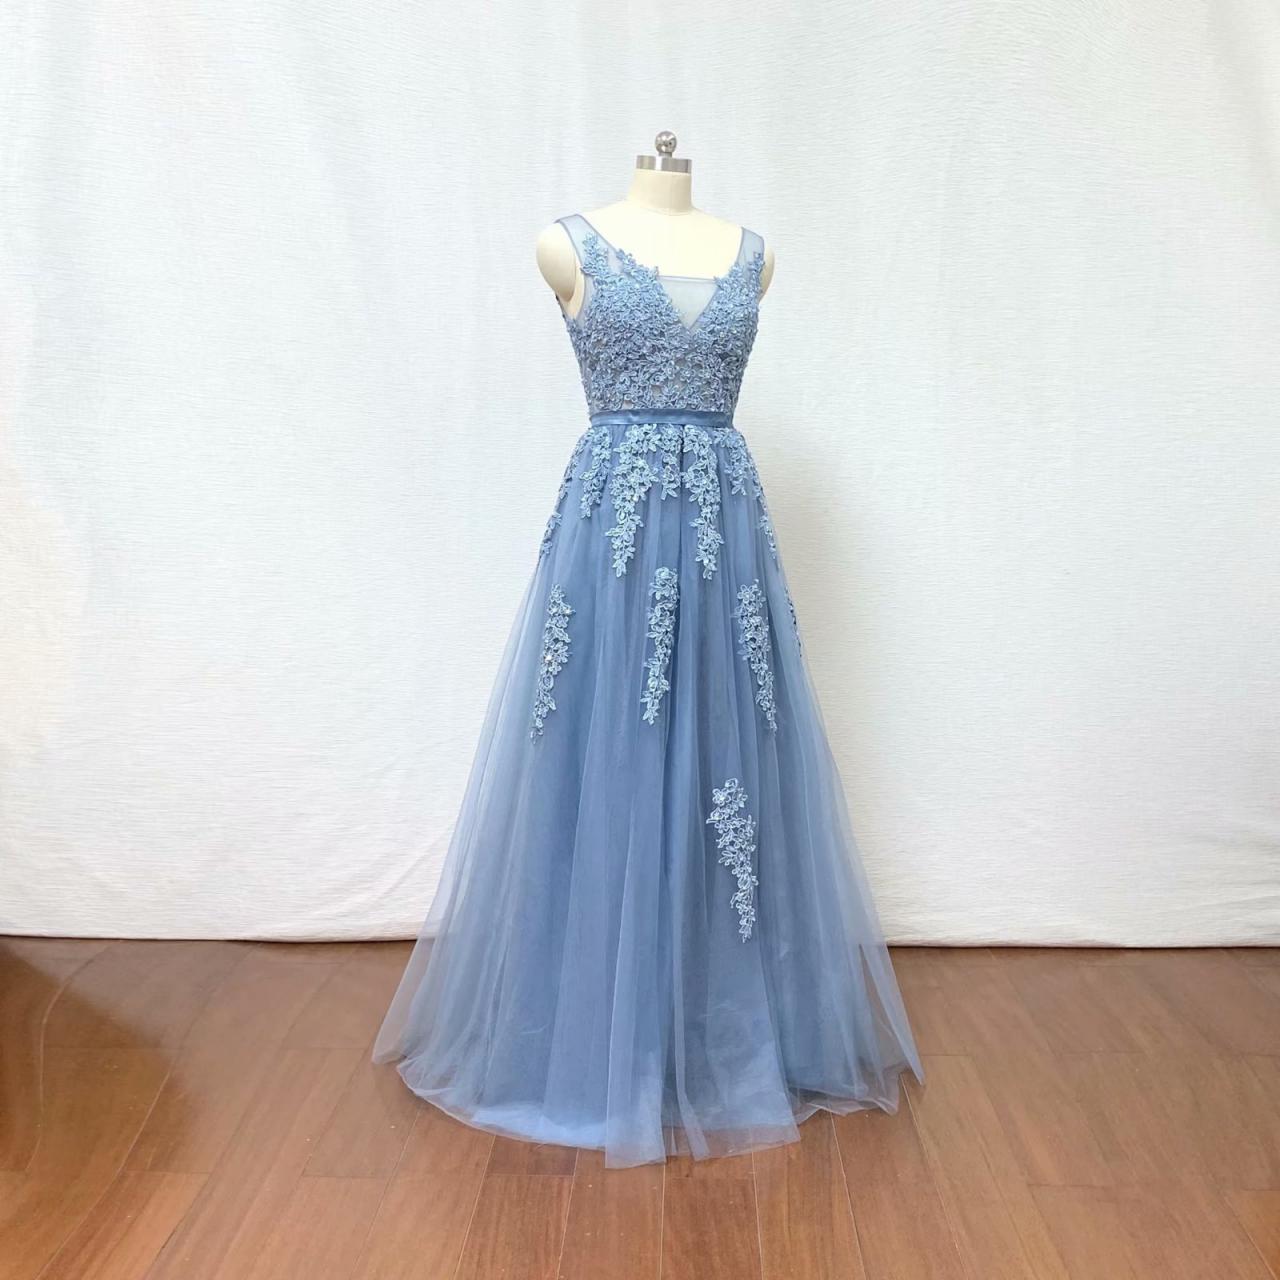 2019 Light Blue Lace Applique Formal Dresses Evening Dresses Backless Tulle Prom Gowns